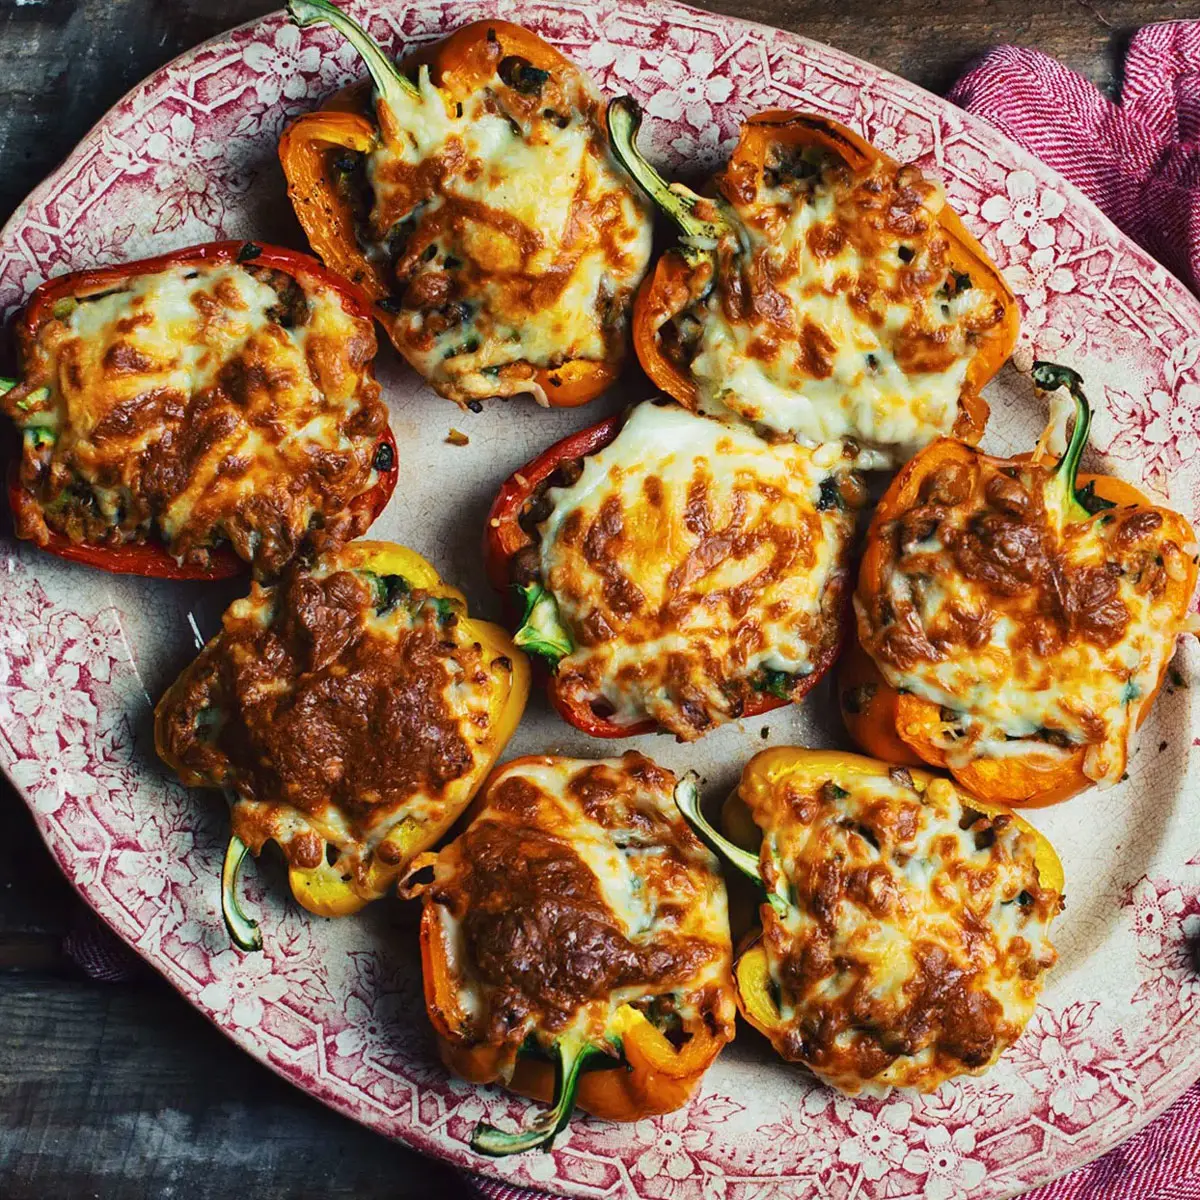 Stuffed peppers with mushrooms, zucchinis and Italian sausages